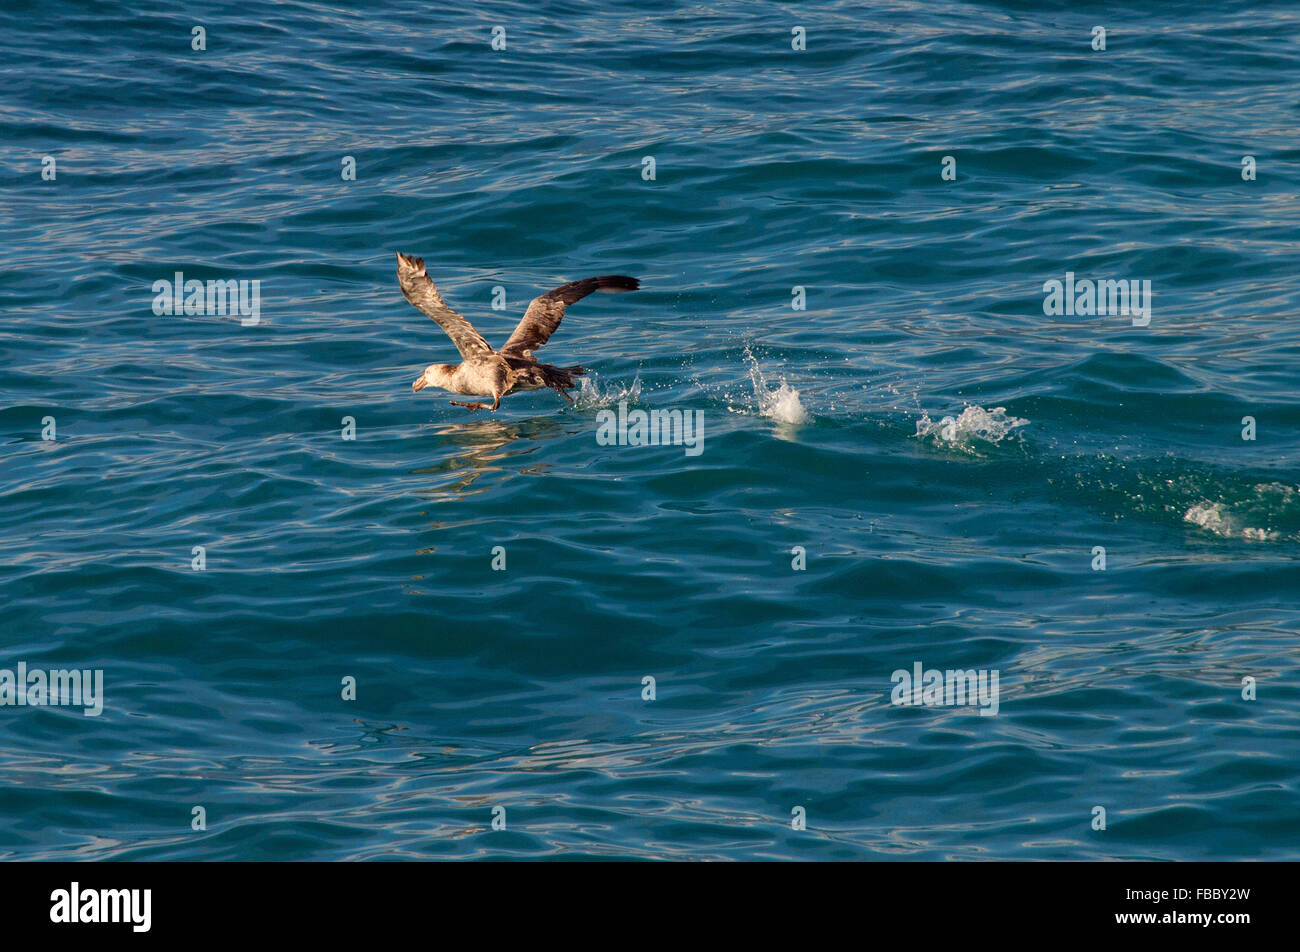 Giant petrel taking off from water Stock Photo